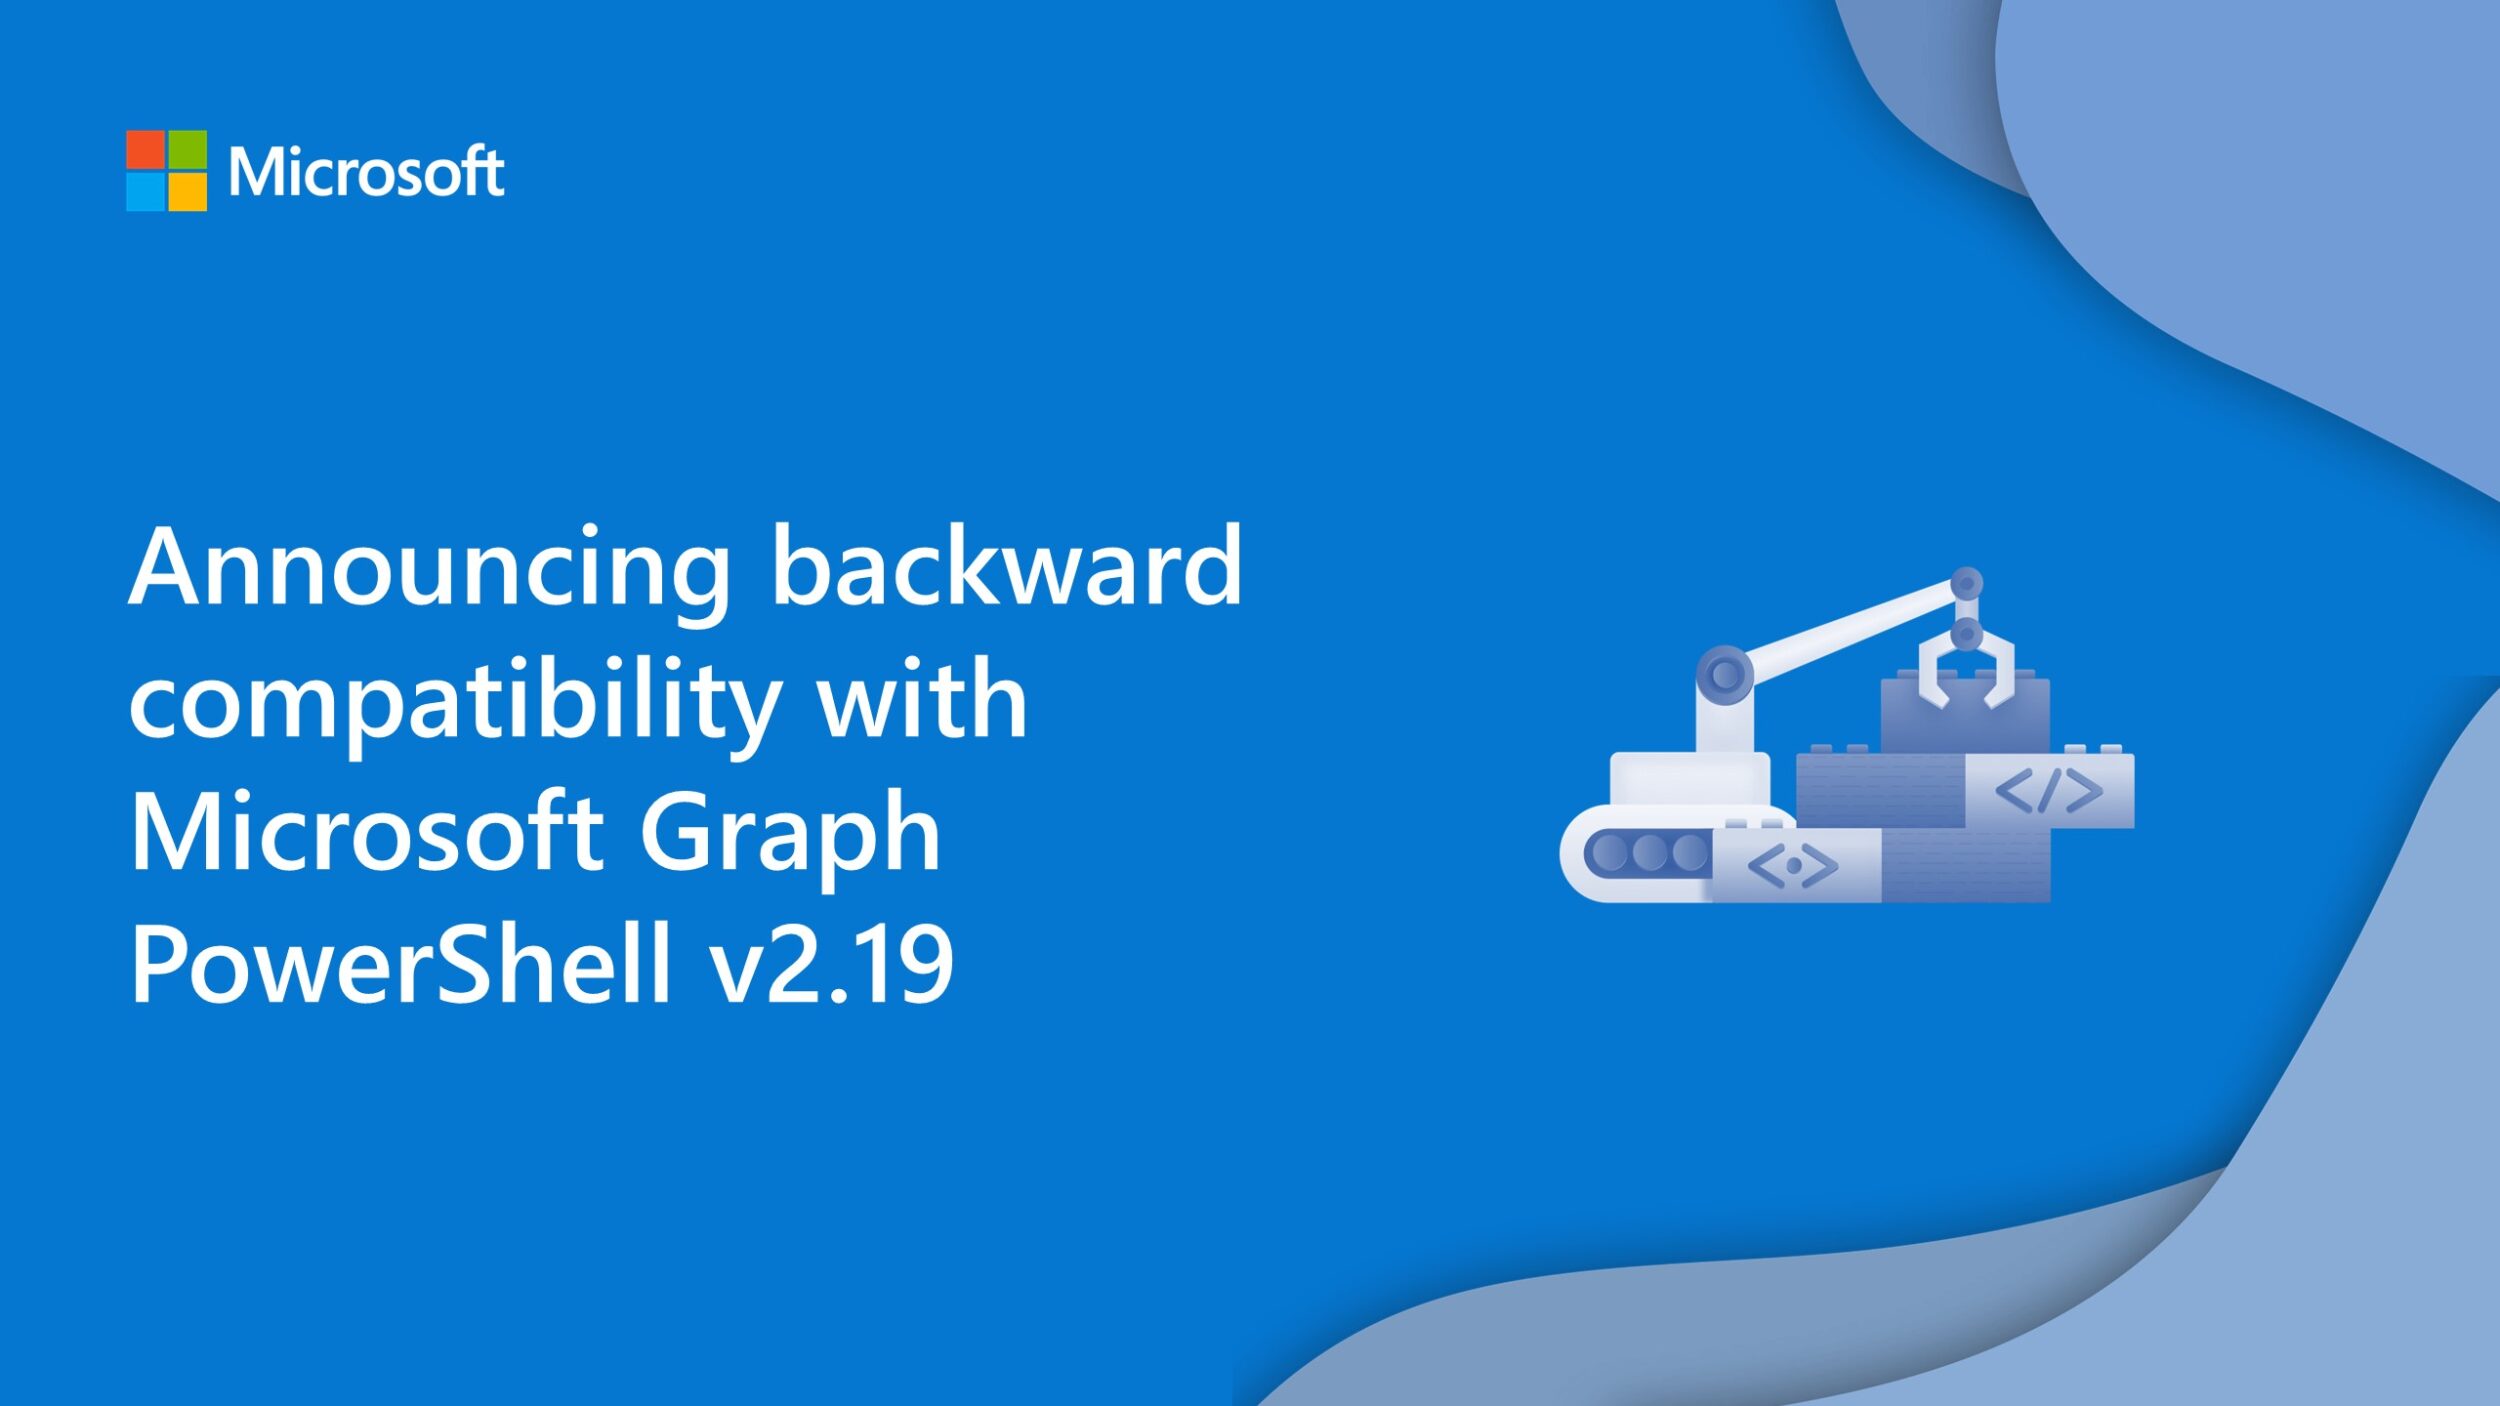 Announcing backward compatibility with Microsoft Graph PowerShell v2.19